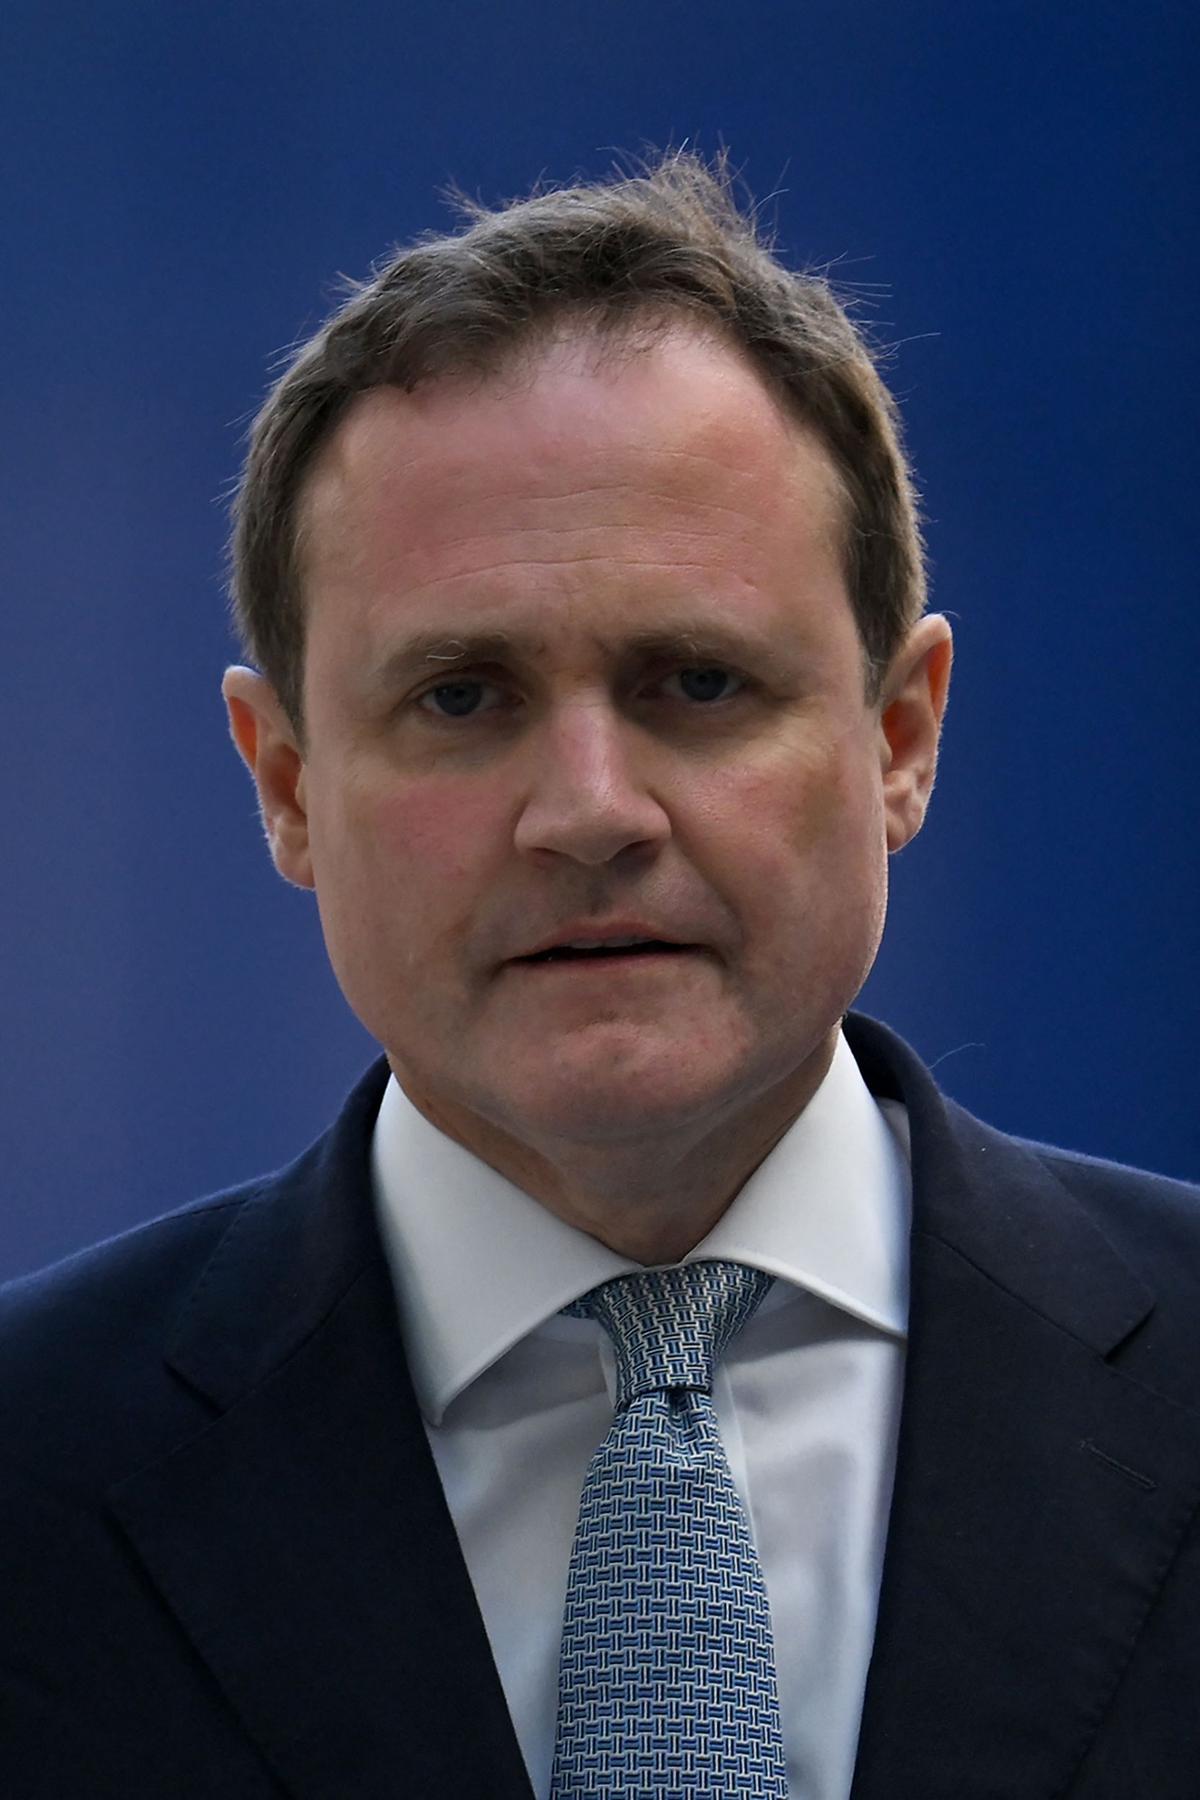 A file photo of Conservative politician Tom Tugendhat 